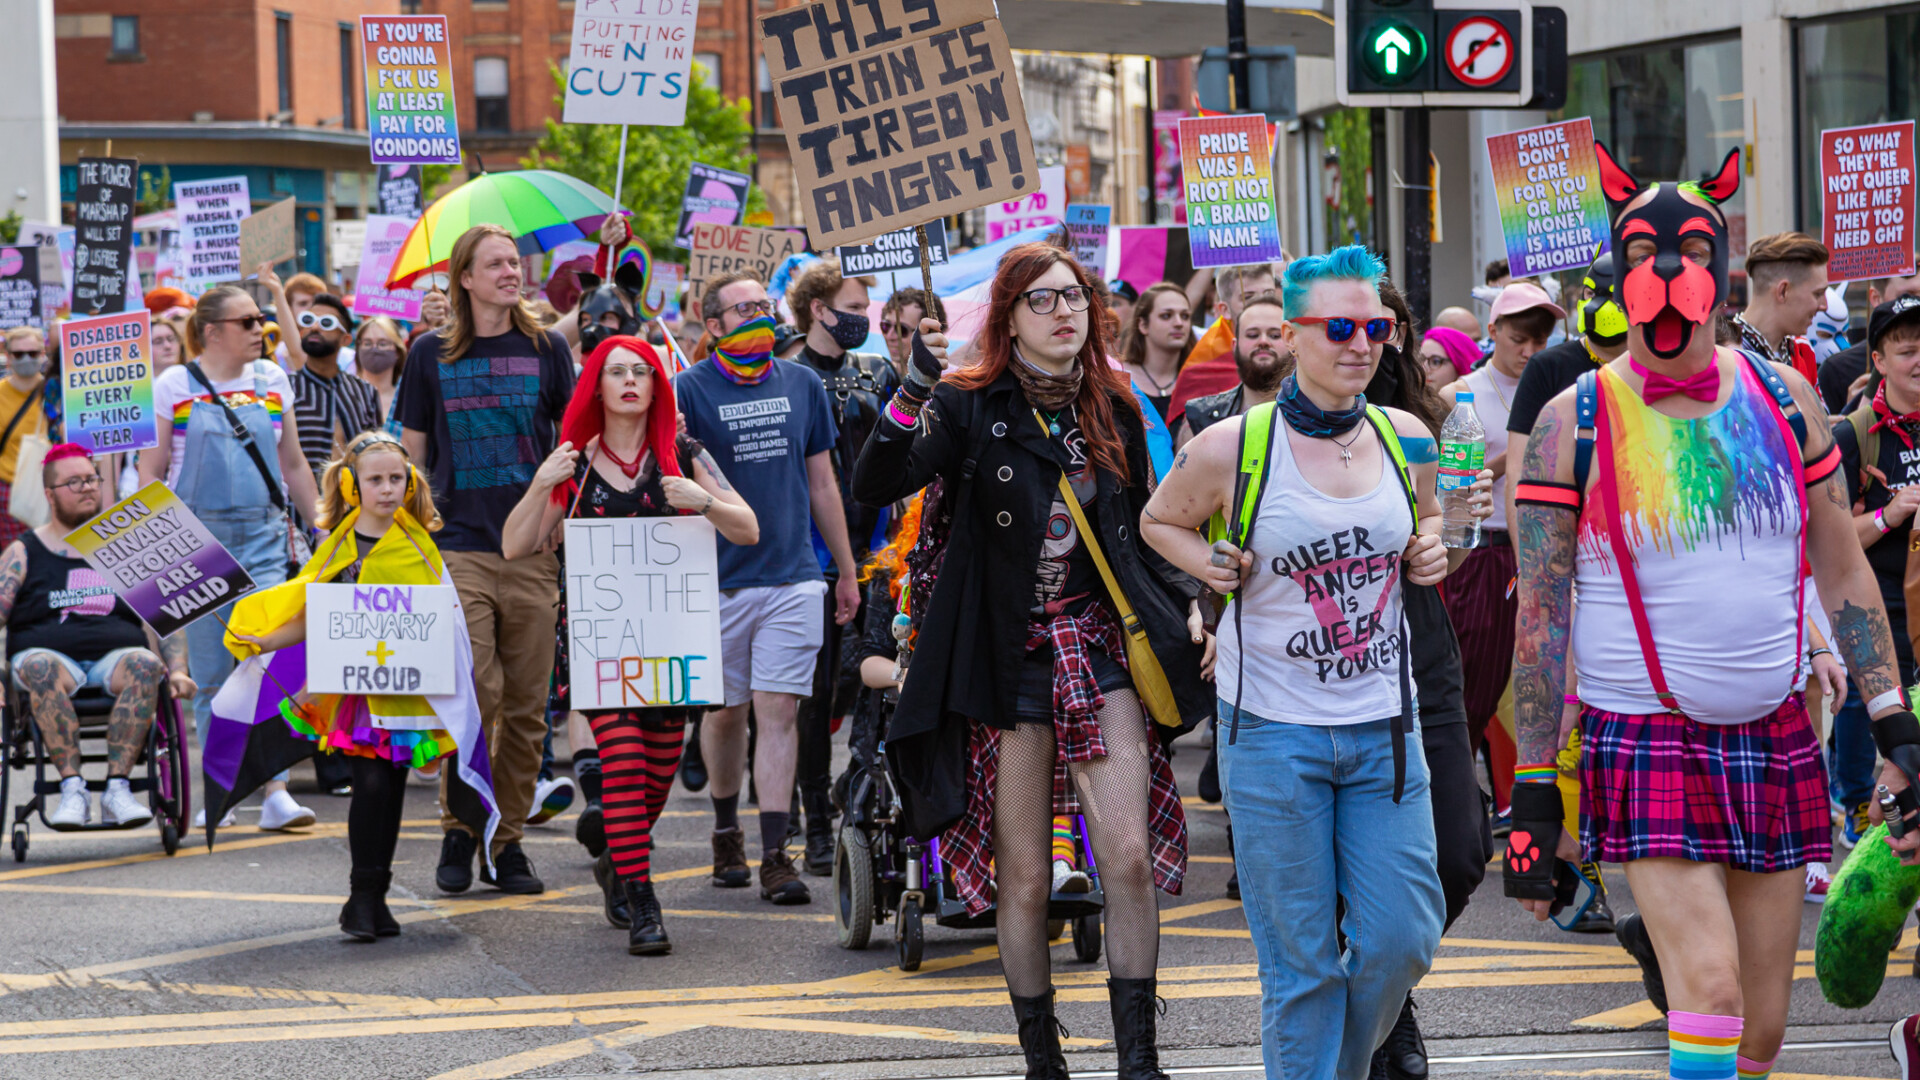 Some of the 1,500 people who attended the Manchester Pride protest march in July 2021